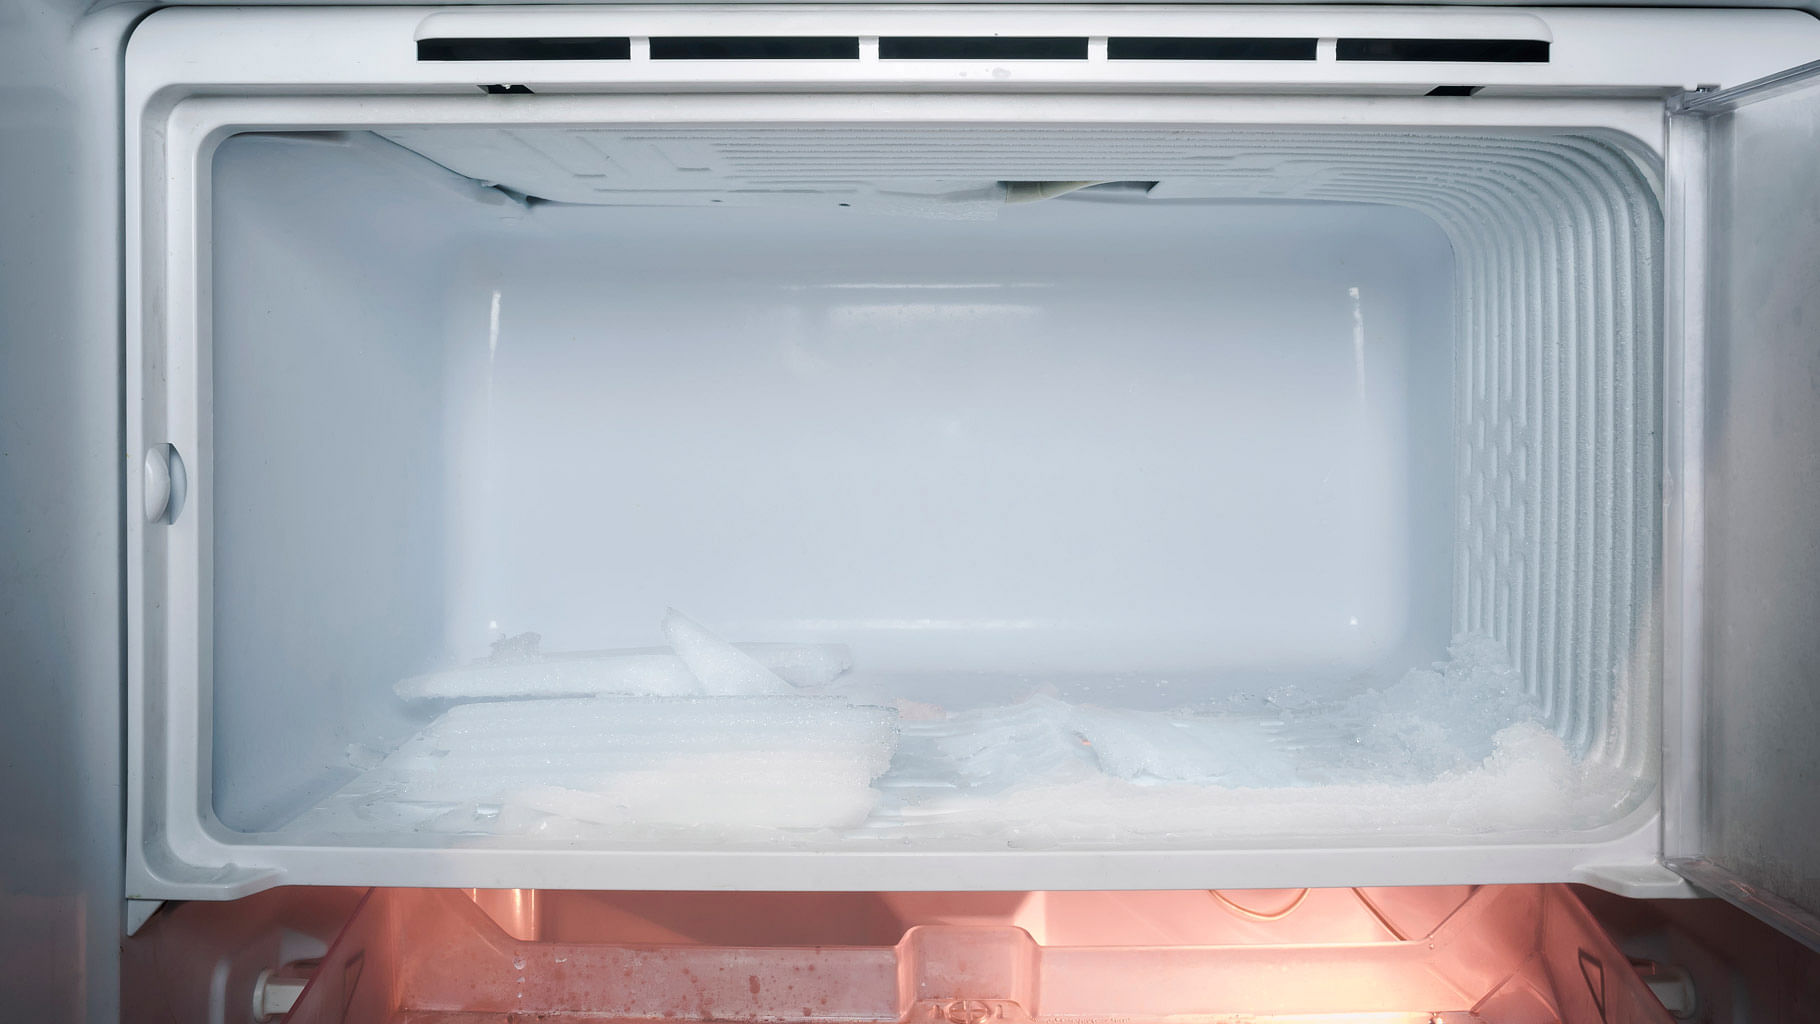 The woman, from North Carolina, bought the freezer for $30 and said that she suspects the body belongs to her neighbour’s elderly mother. Image for representational purposes only. (Photo: iStock)